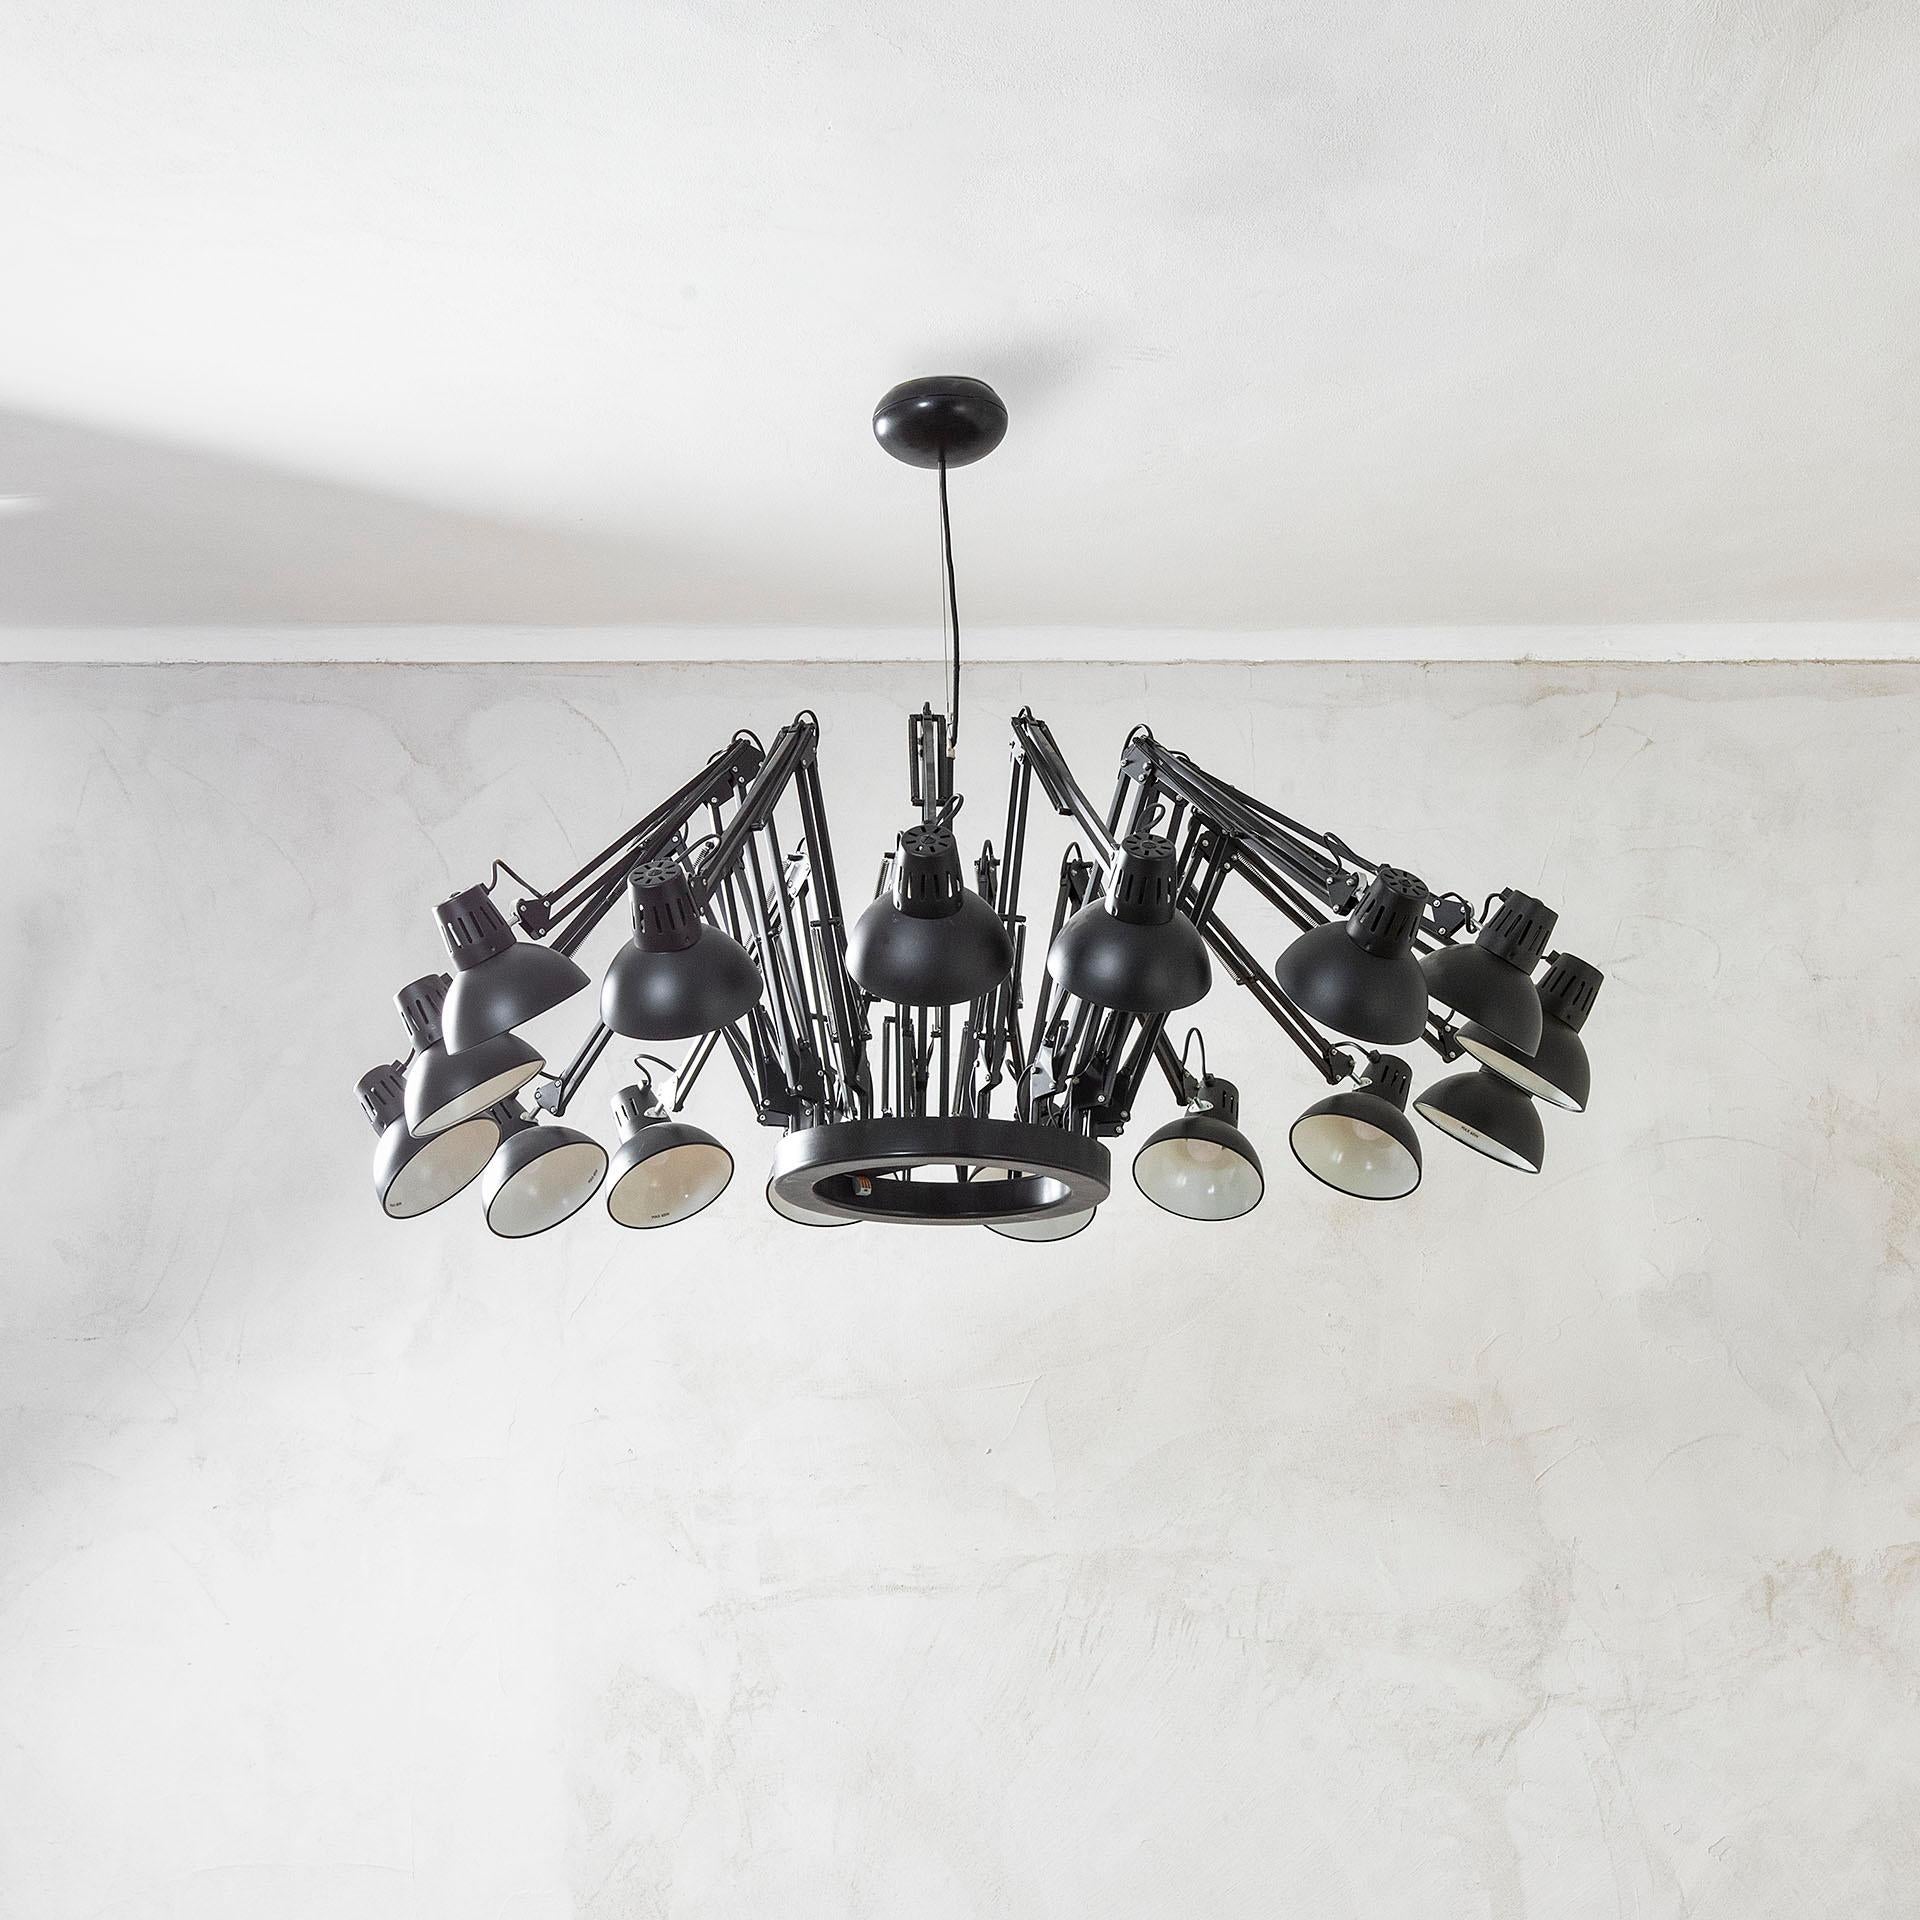 Powder-Coated Ron Gilad Chandelier Mod. Dear Ingo for Moooi with 16 Directional Diffusers For Sale